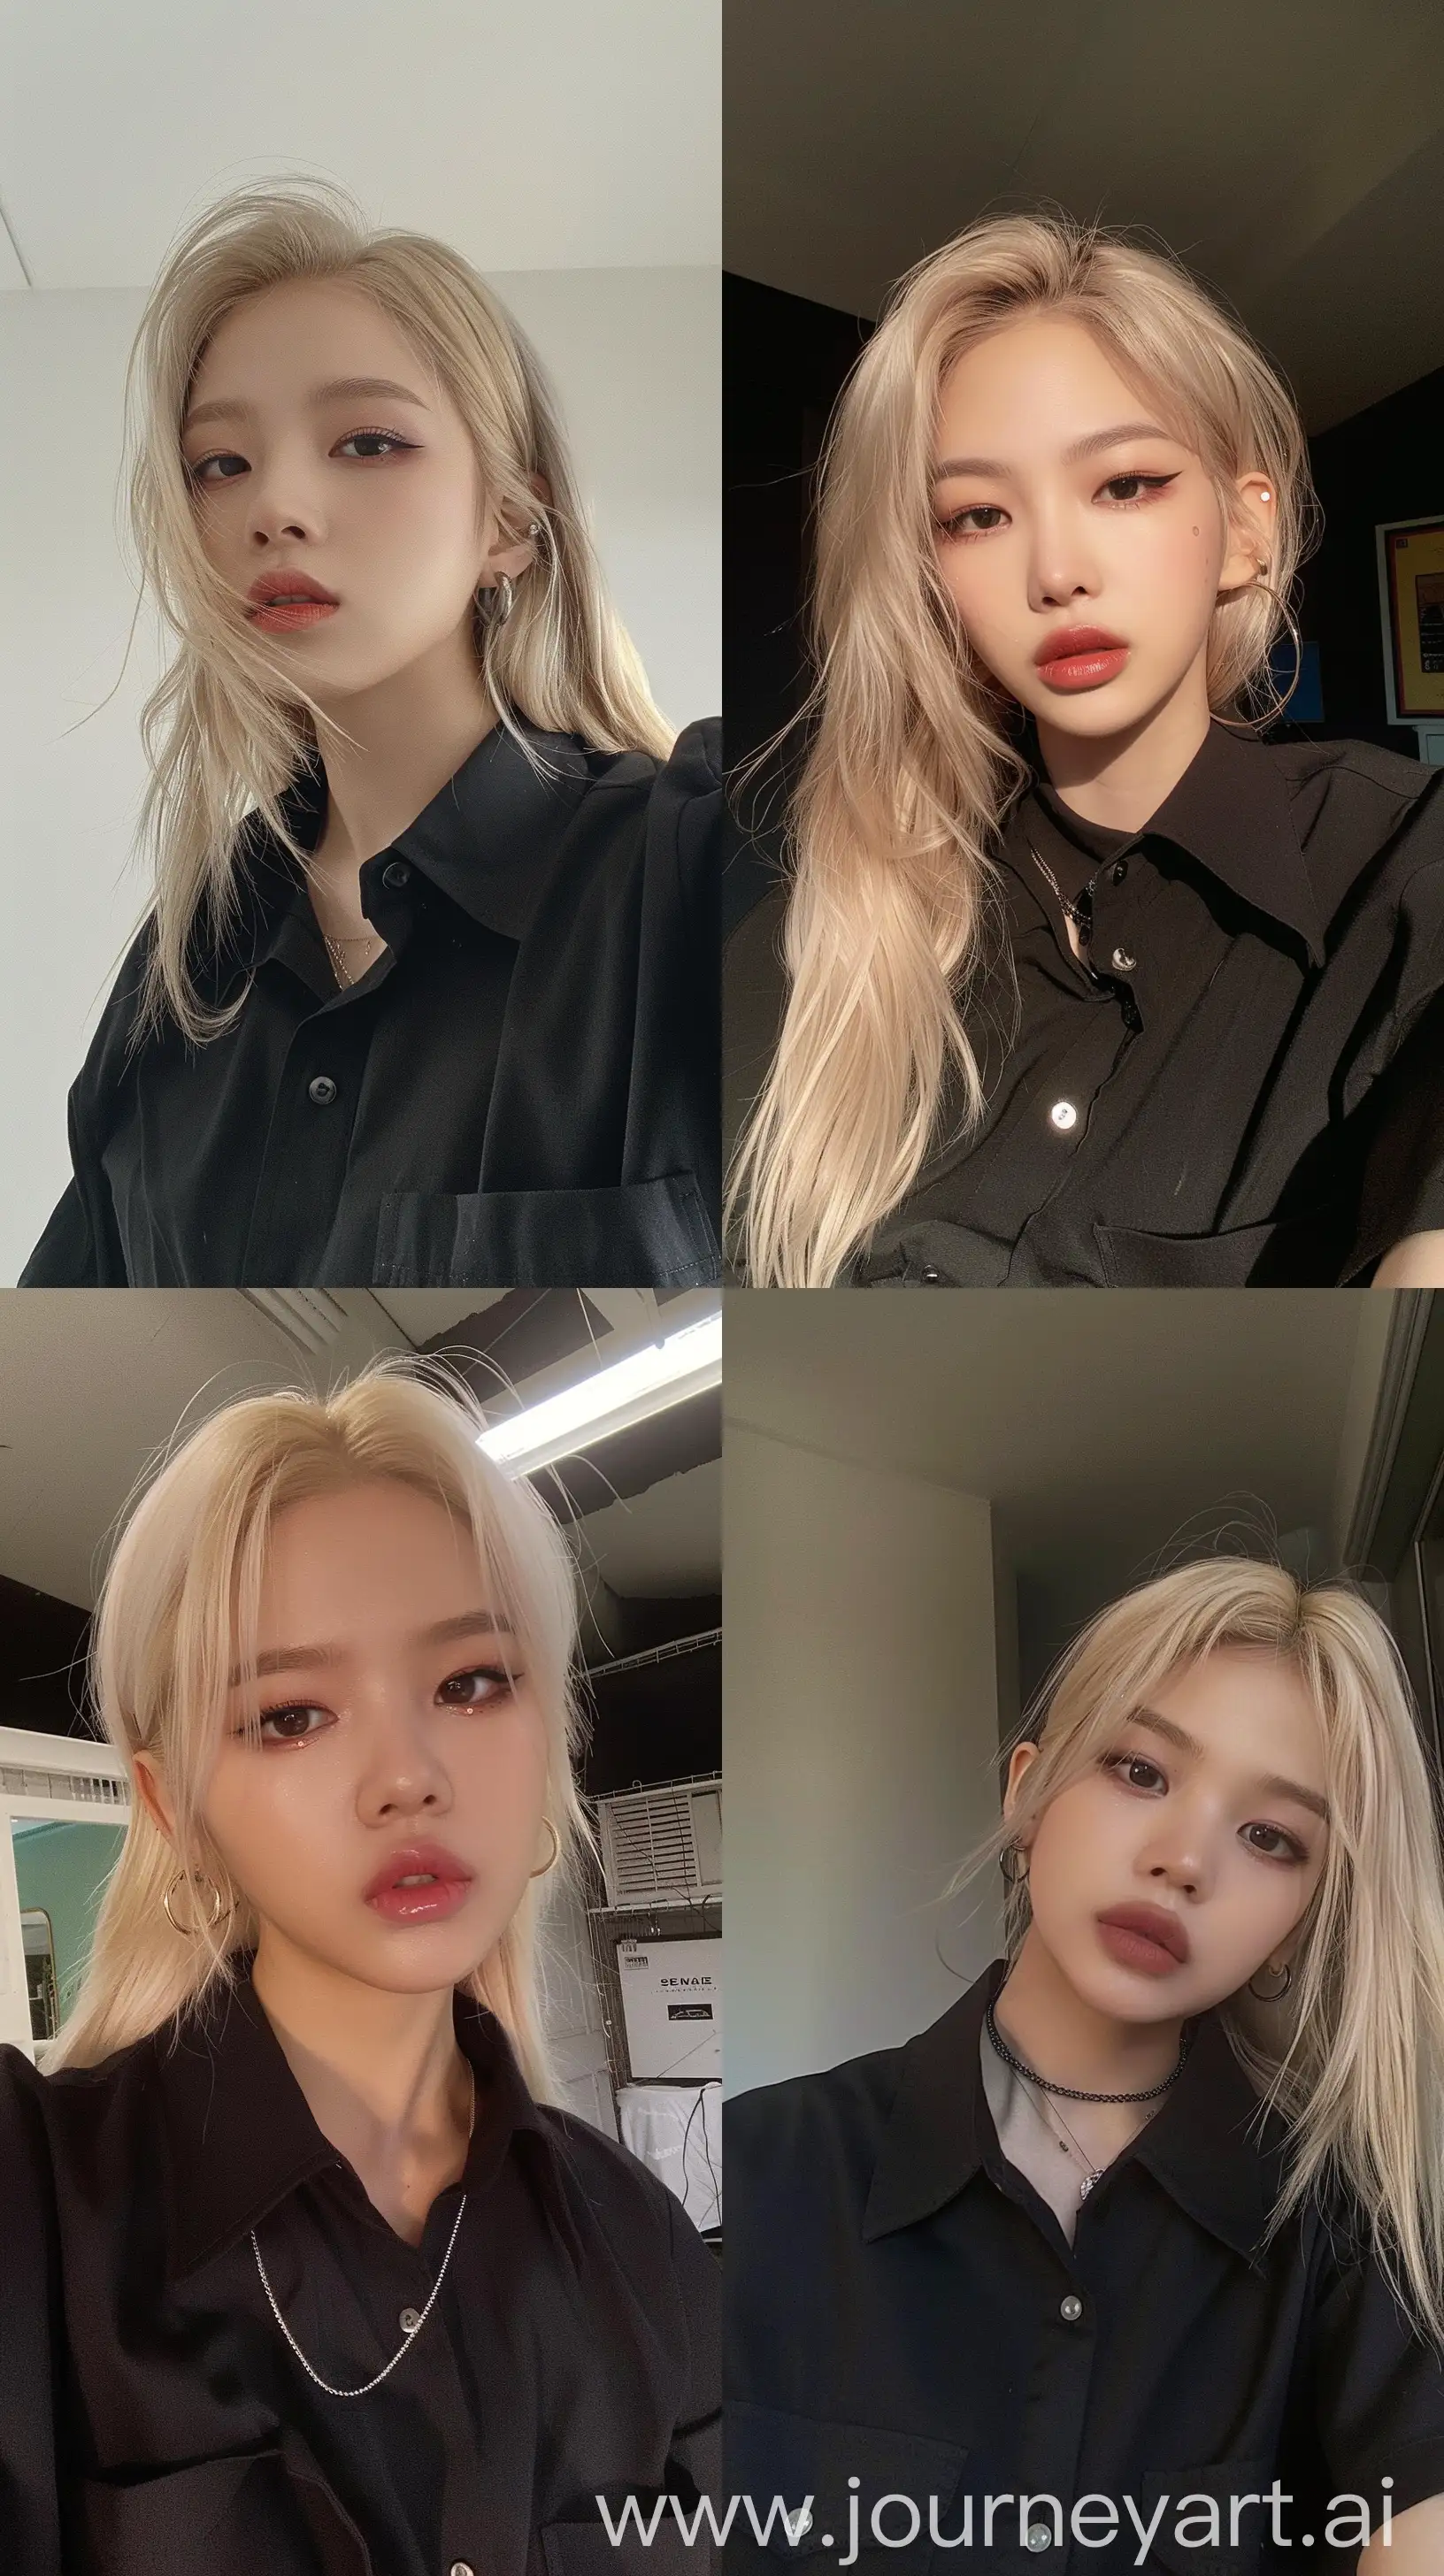 Aesthetic-Selfie-of-Blackpinks-Jennie-with-Stylish-Black-Attire-and-Blonde-Hair